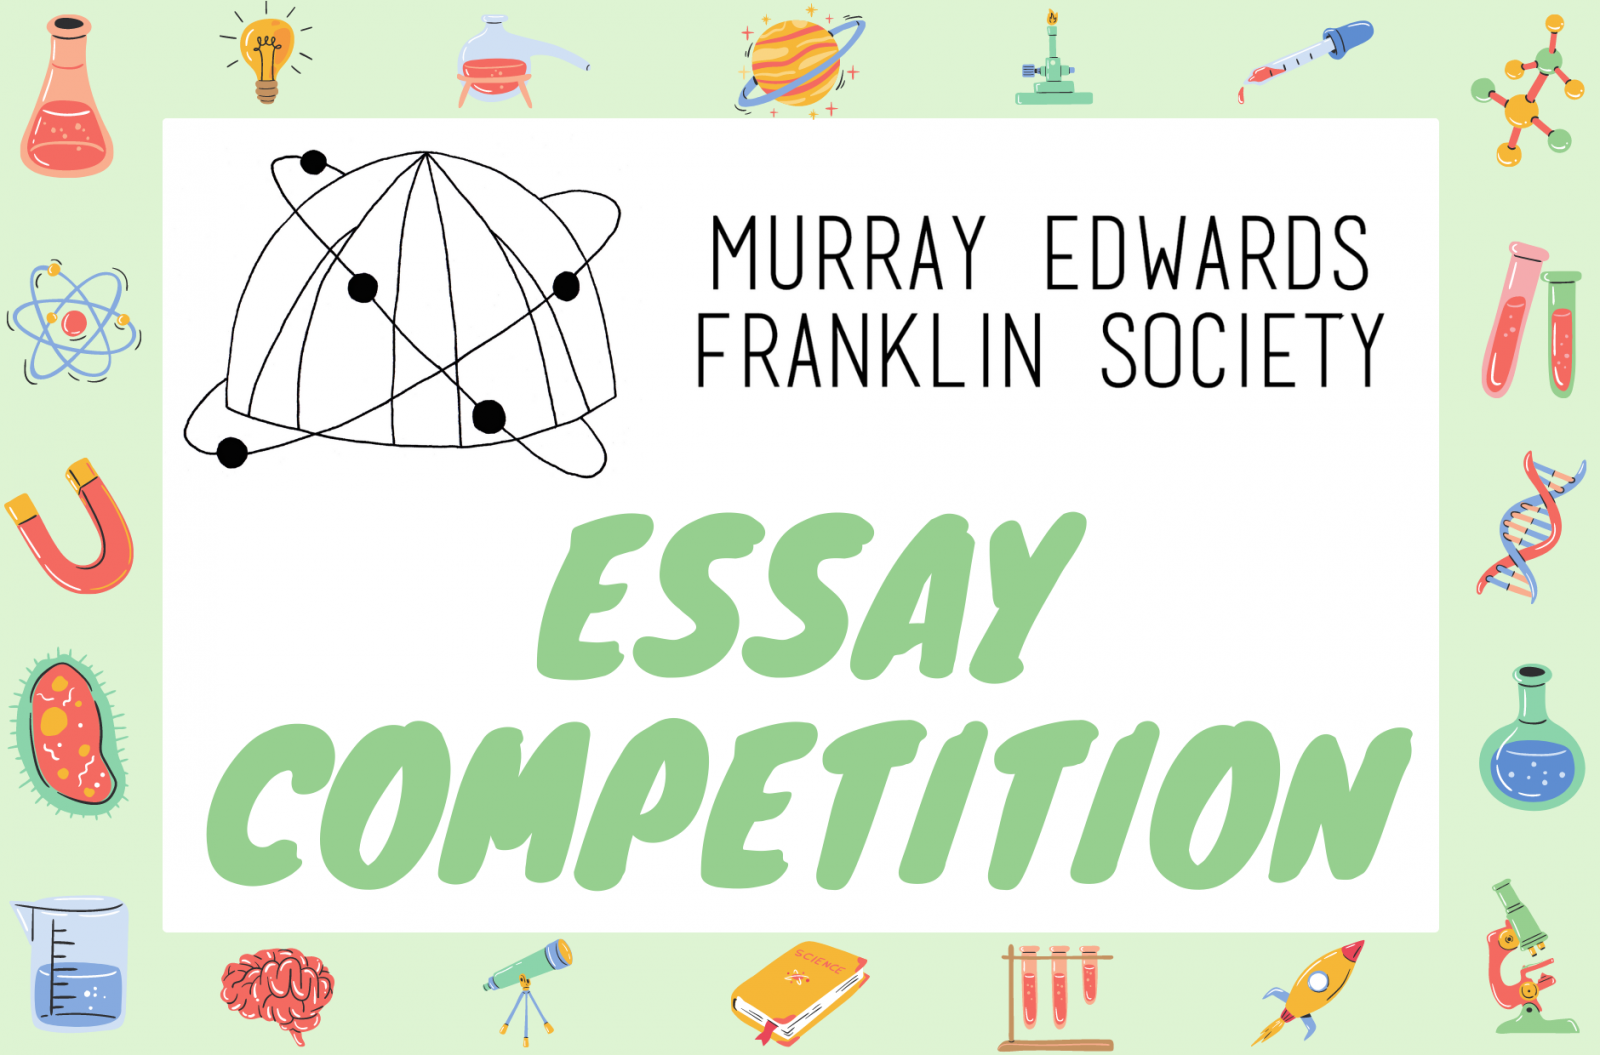 competition in society essay